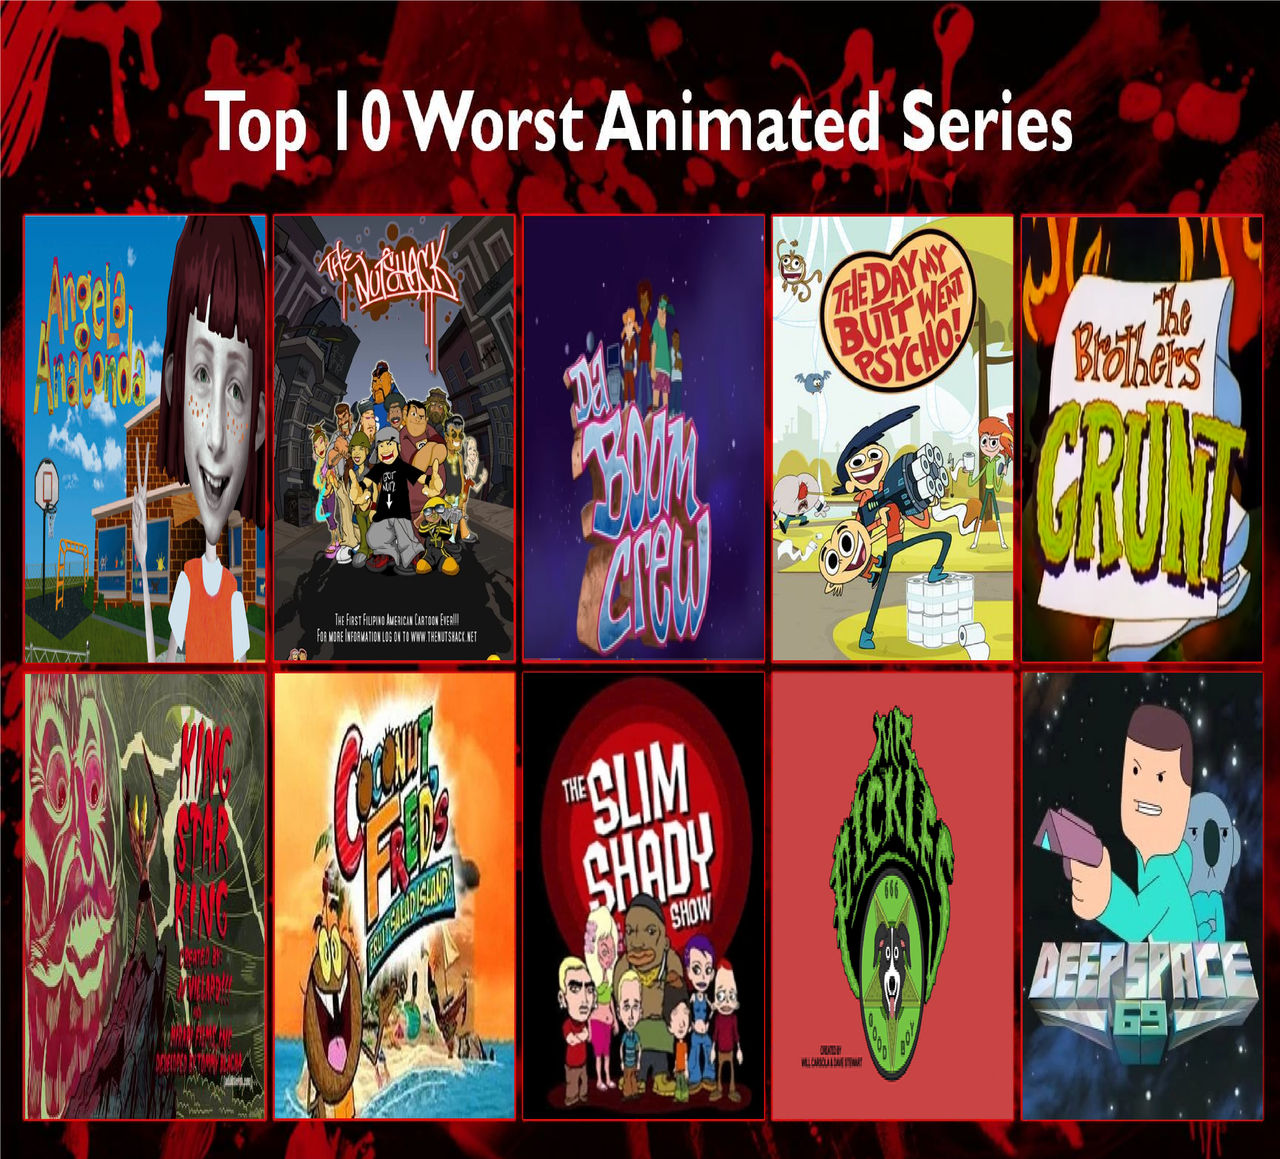 Top 10 Worst Animated Series Part 3 by Perro2017 on DeviantArt